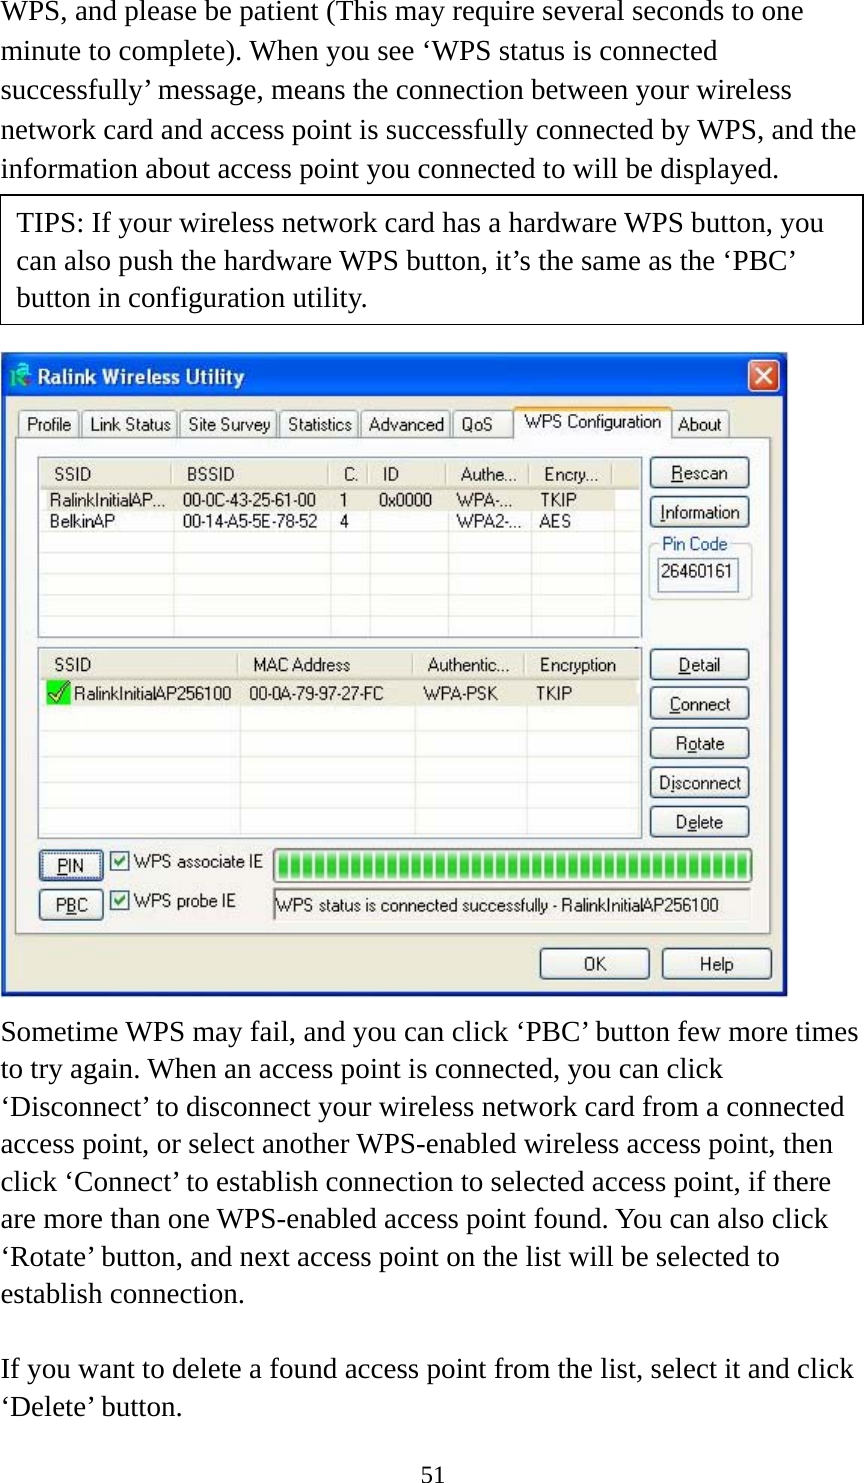  51WPS, and please be patient (This may require several seconds to one minute to complete). When you see ‘WPS status is connected successfully’ message, means the connection between your wireless network card and access point is successfully connected by WPS, and the information about access point you connected to will be displayed.      Sometime WPS may fail, and you can click ‘PBC’ button few more times to try again. When an access point is connected, you can click ‘Disconnect’ to disconnect your wireless network card from a connected access point, or select another WPS-enabled wireless access point, then click ‘Connect’ to establish connection to selected access point, if there are more than one WPS-enabled access point found. You can also click ‘Rotate’ button, and next access point on the list will be selected to establish connection.  If you want to delete a found access point from the list, select it and click ‘Delete’ button.   TIPS: If your wireless network card has a hardware WPS button, you can also push the hardware WPS button, it’s the same as the ‘PBC’ button in configuration utility. 